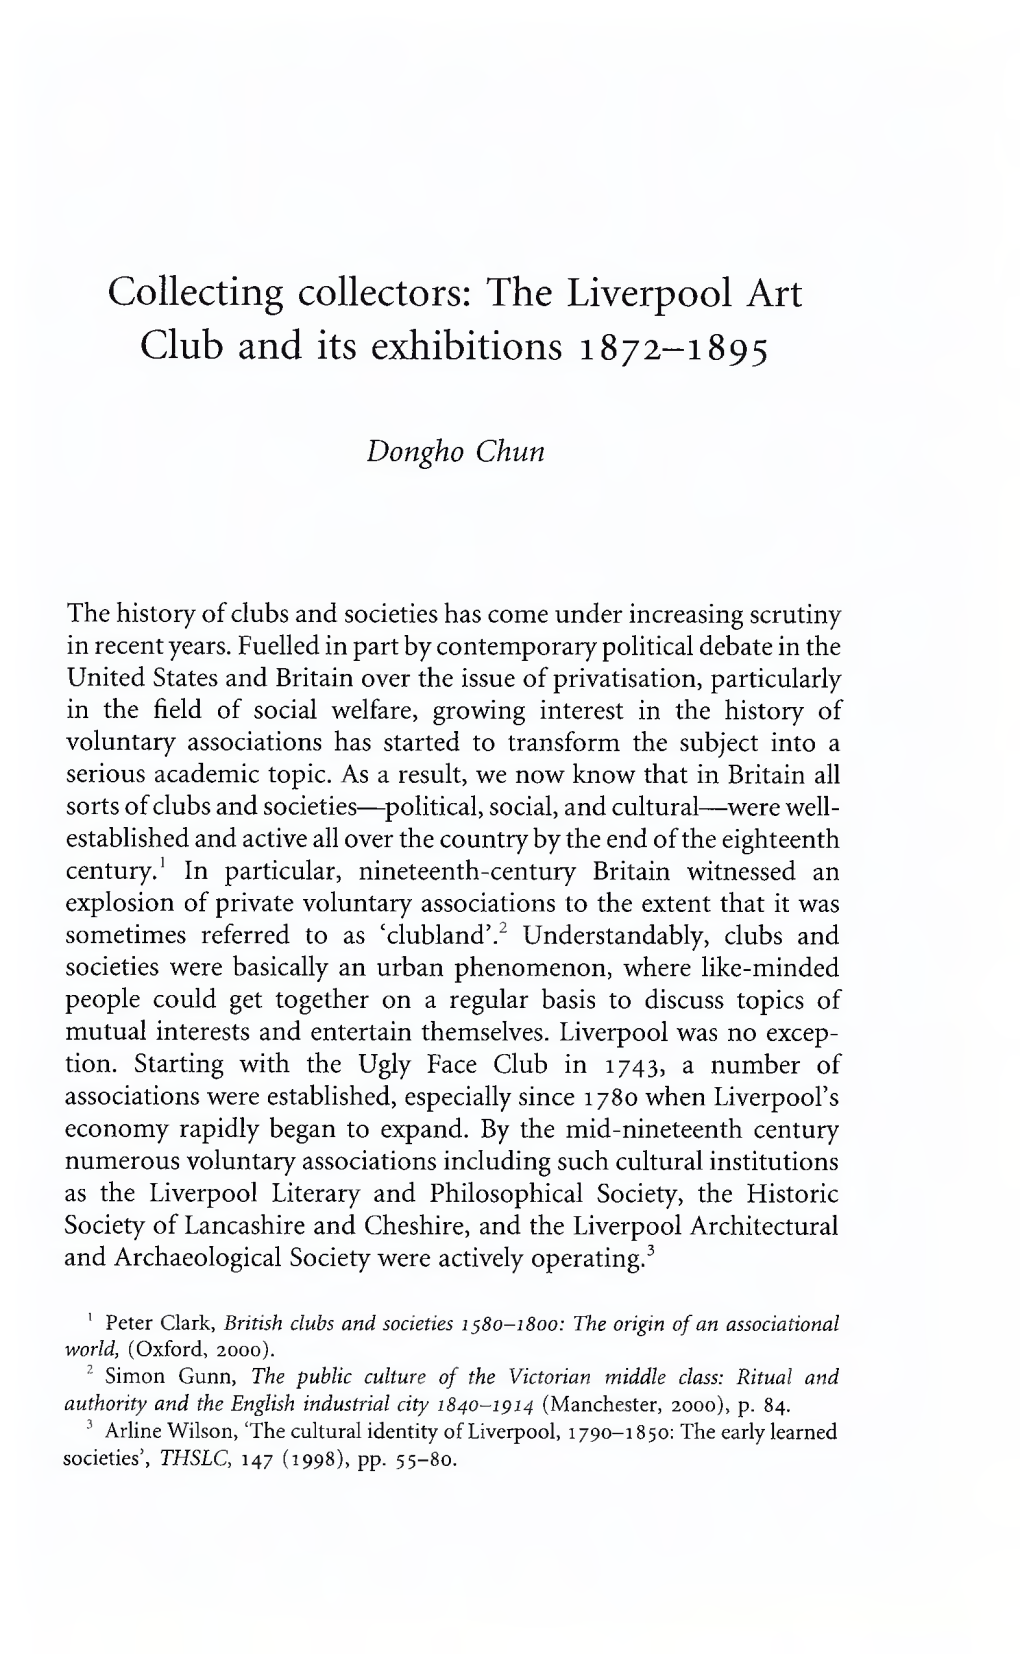 Collecting Collectors: the Liverpool Art Club and Its Exhibitions 1872-1895